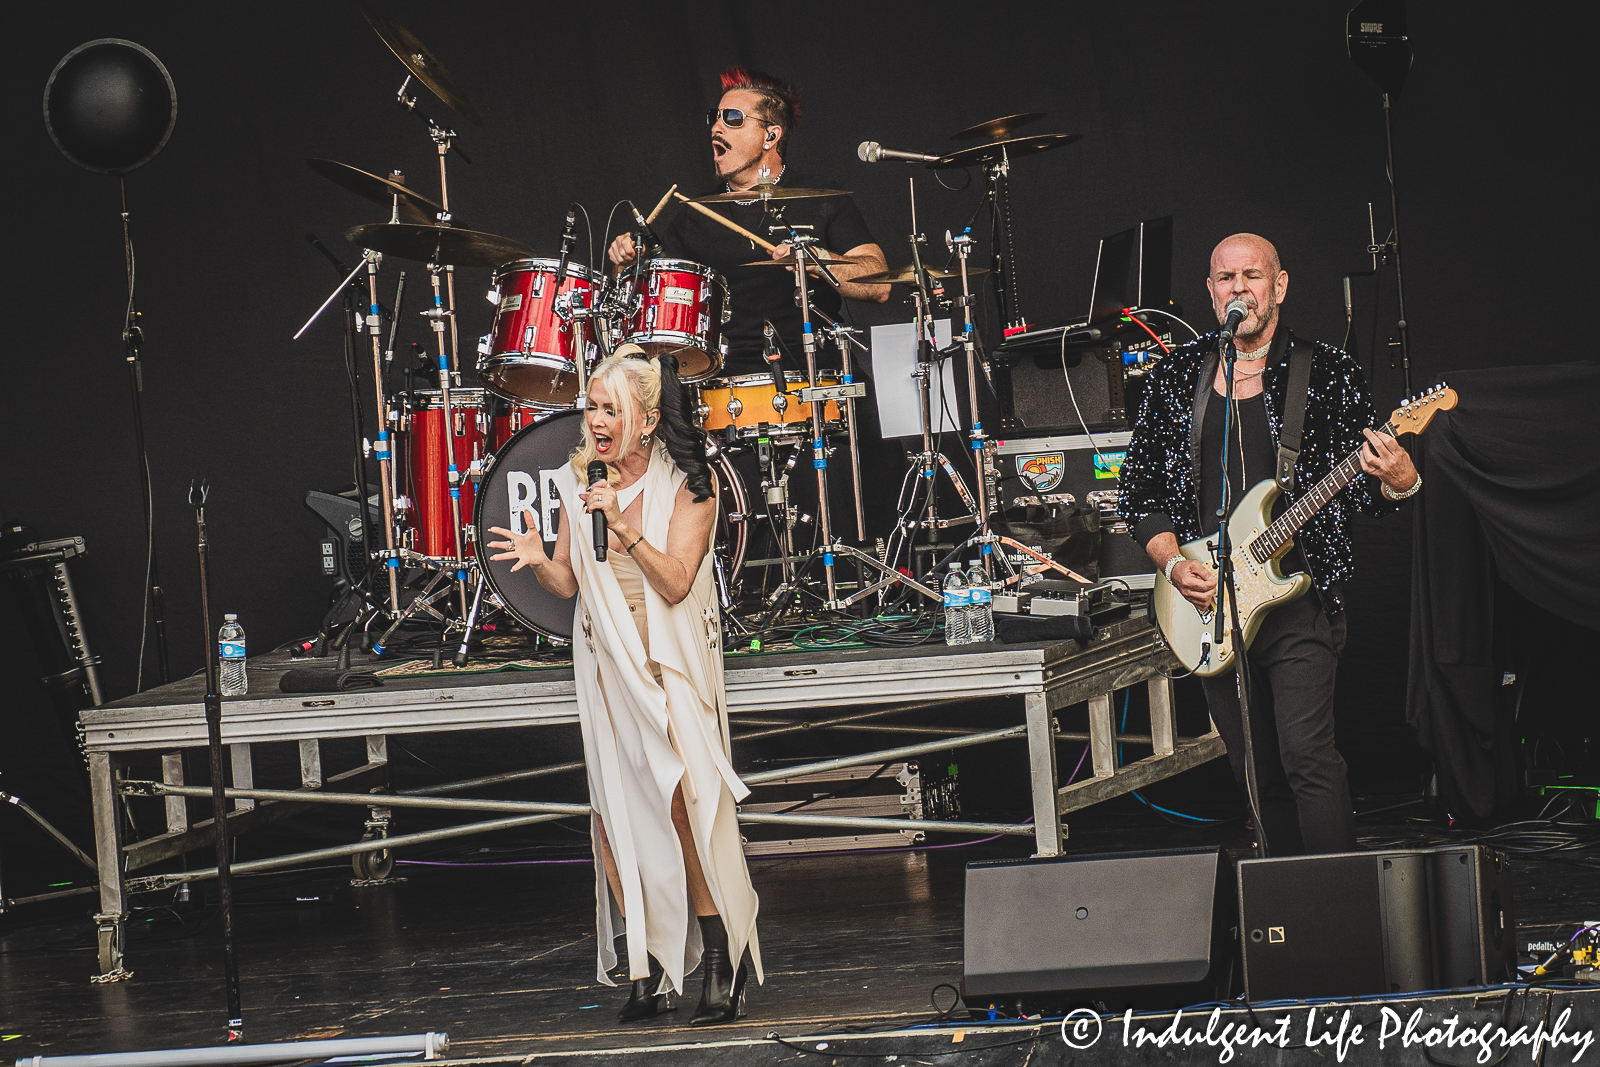 Lead singer Terri Nunn of Berlin with drummer Ric "Rocc" Roccapriore and guitarist David Diamond at Starlight Theatre in Kansas City, MO on August 8, 2023.